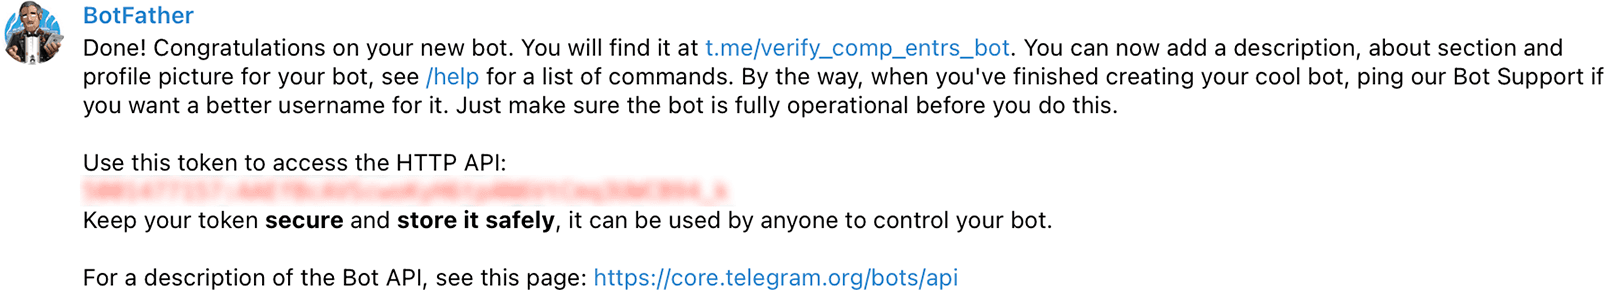 New bot created message from BotFather on Telegram interface